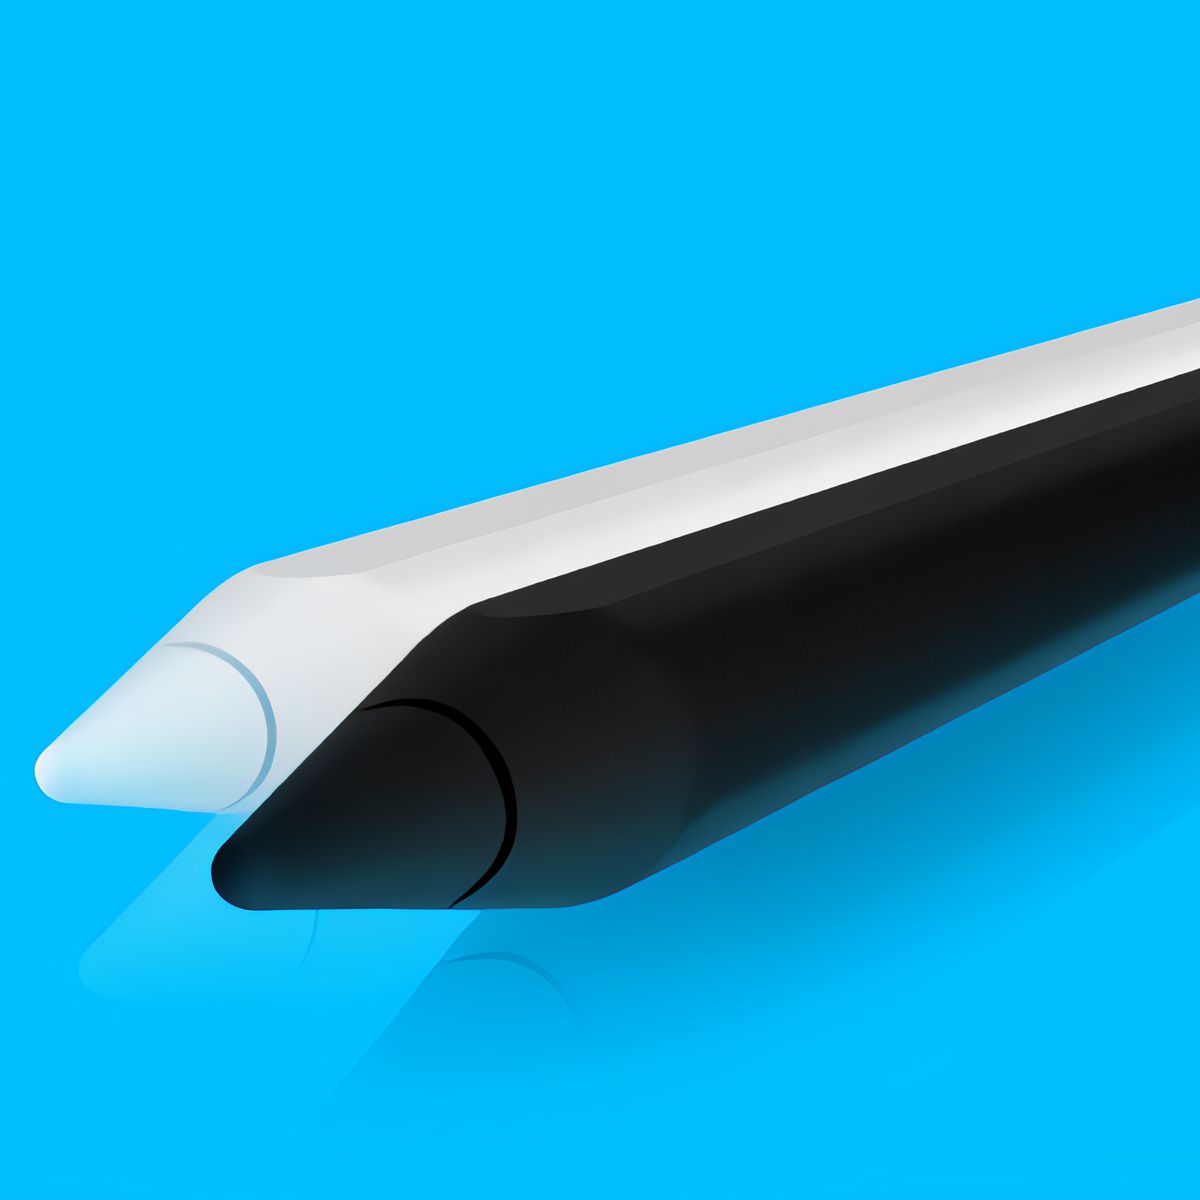 Next Apple Pencil Could Be Released in Black - MacRumors